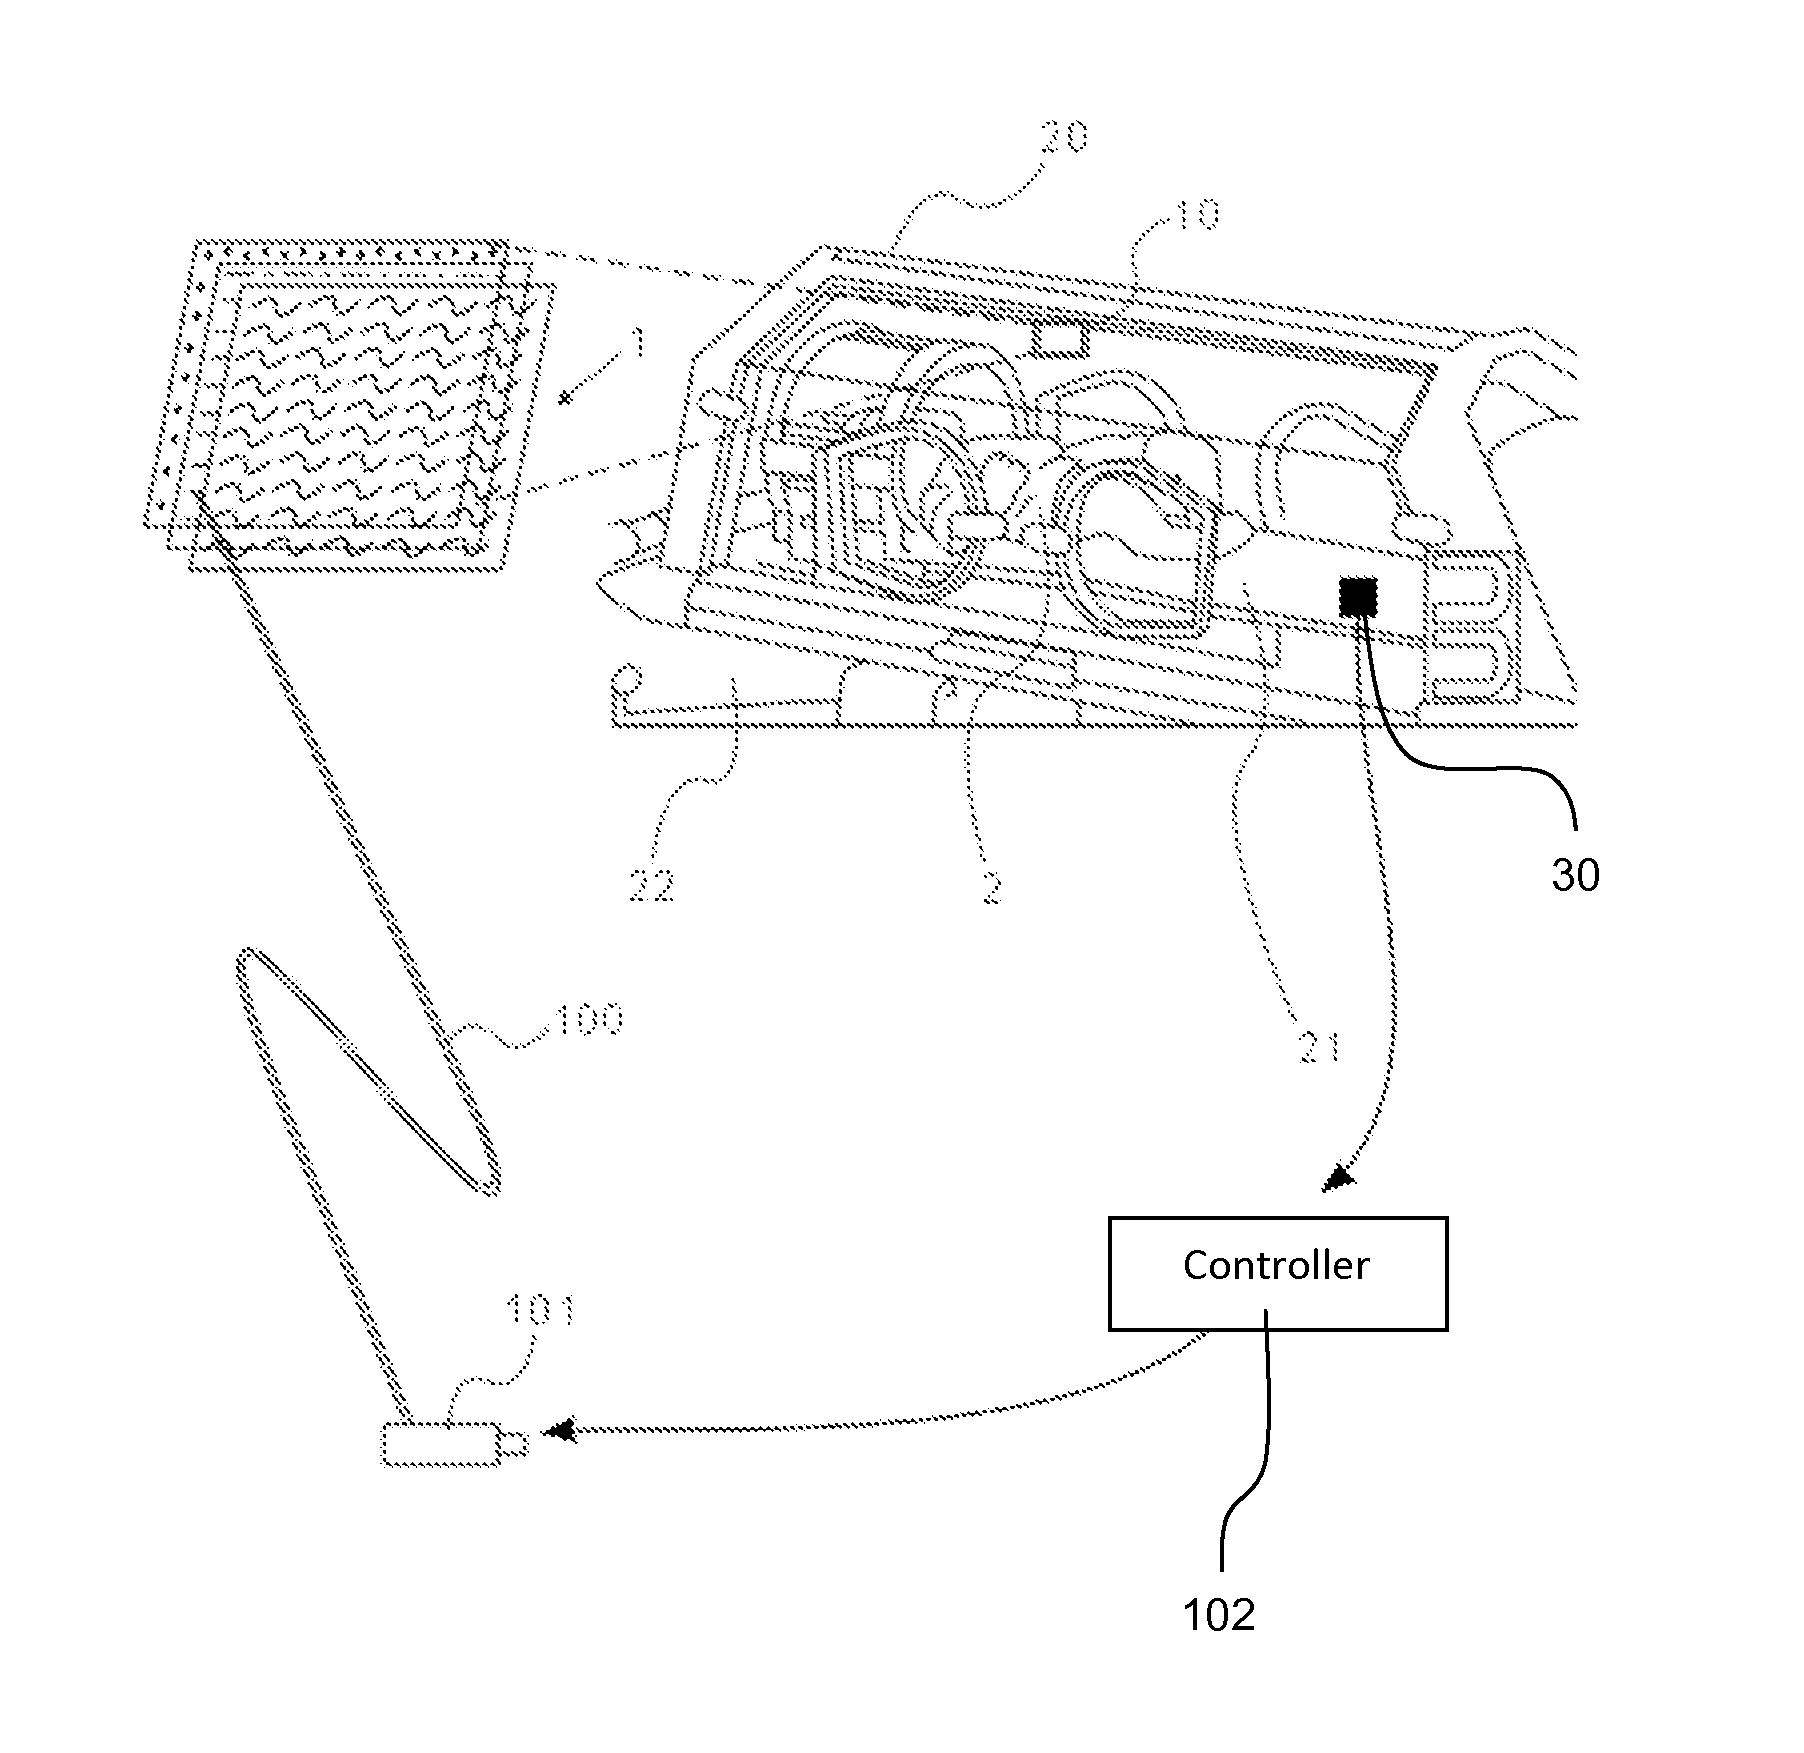 Incubator's canopy with sensor dependent variably transparent walls and methods for dimming lights thereof